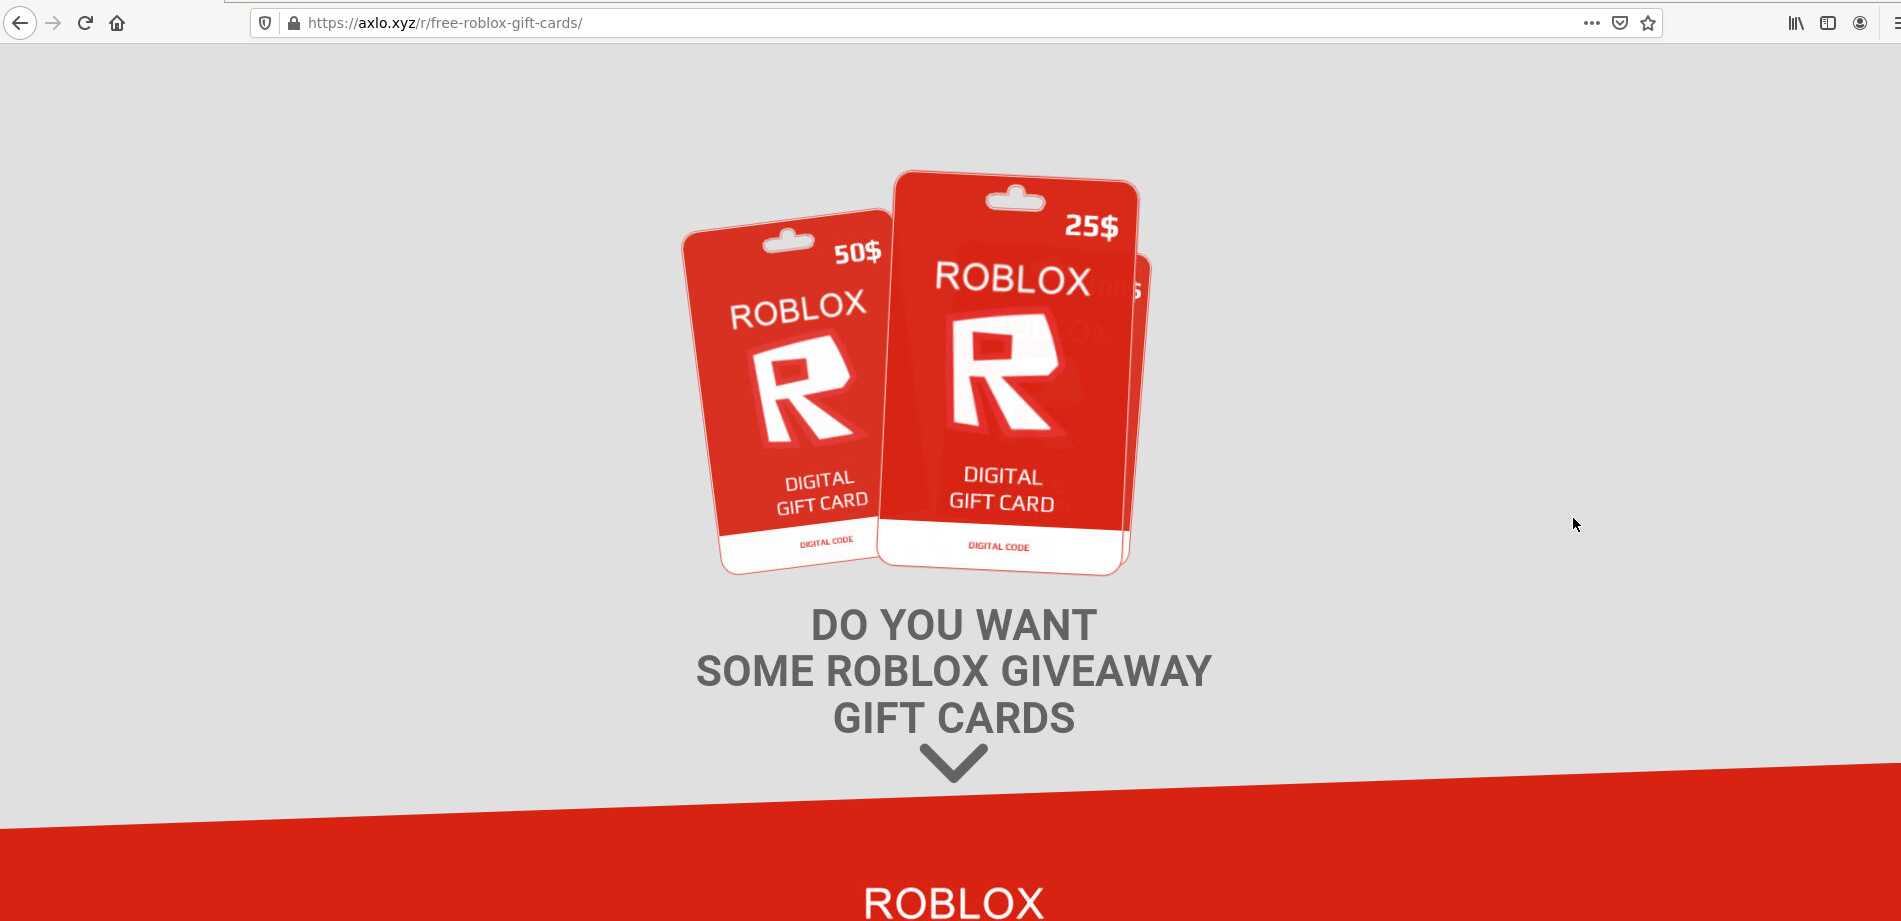 Free Robux Generator No Surveys: How To Get Free Robux Is it Legit?